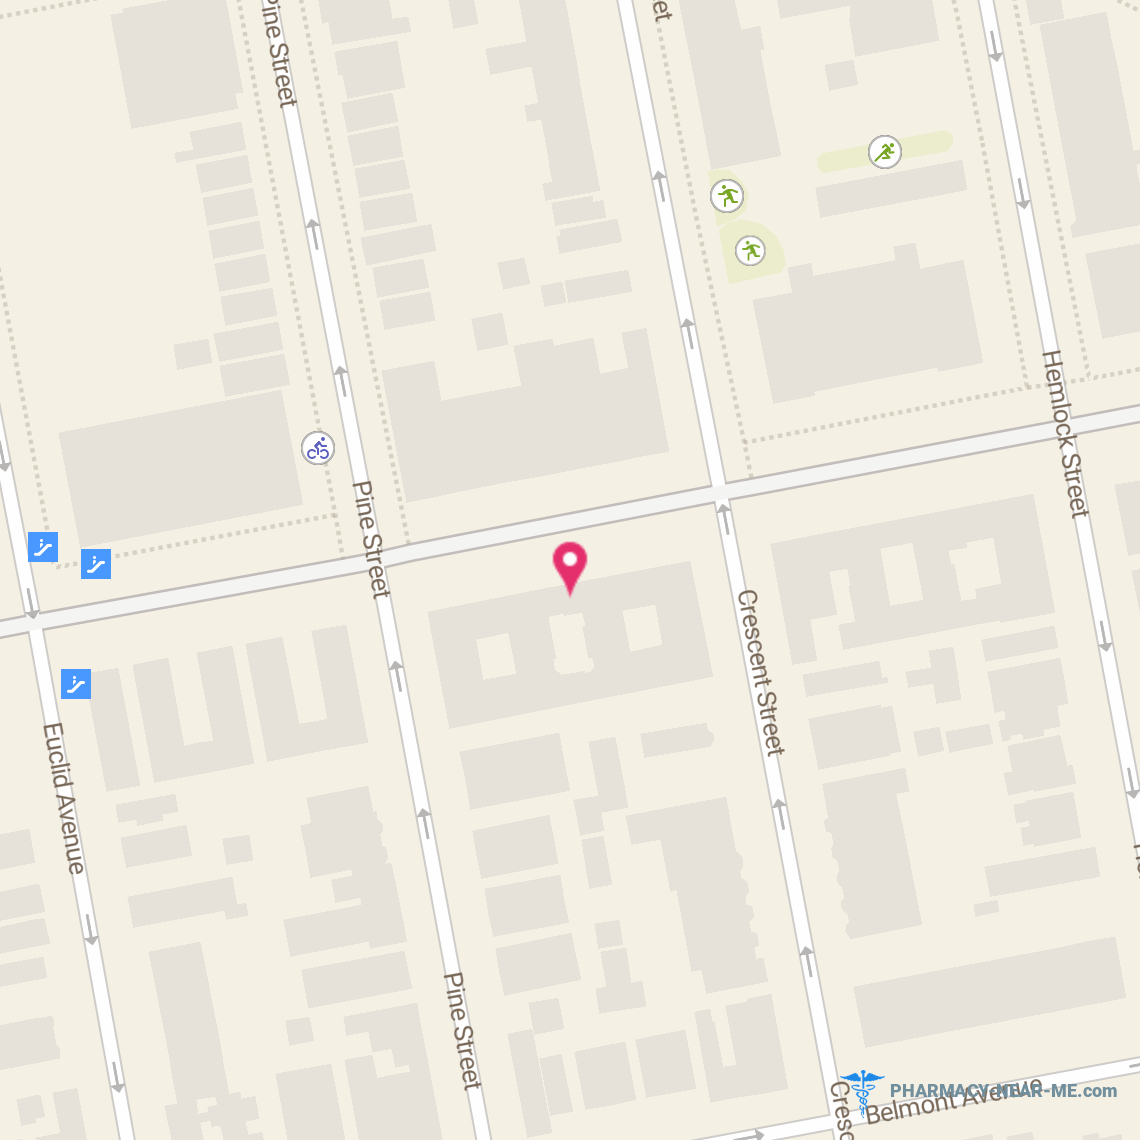 A & F PHARMACY - Pharmacy Hours, Phone, Reviews & Information: 2754 Pitkin Avenue, Brooklyn, New York 11208, United States